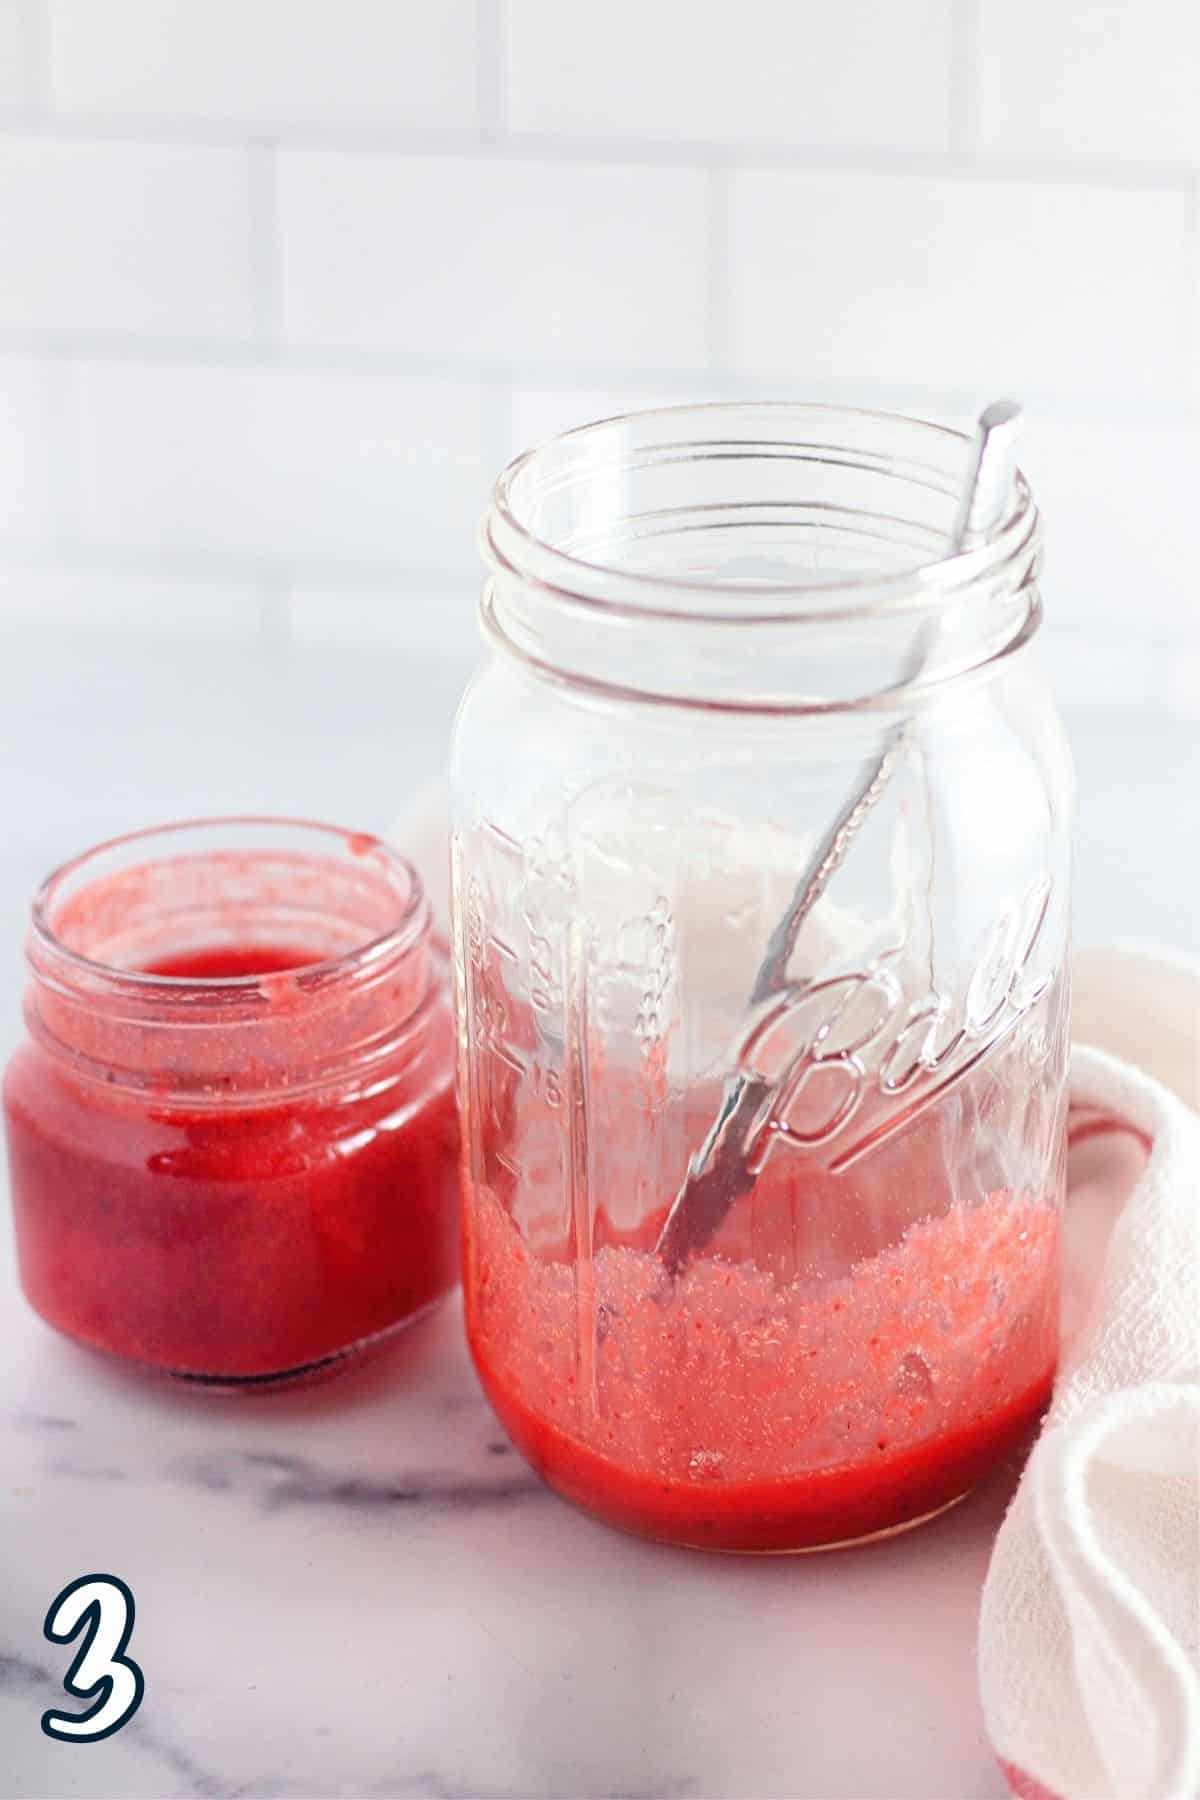 Lemonade mix and strawberry puree mixed together in a glass. 